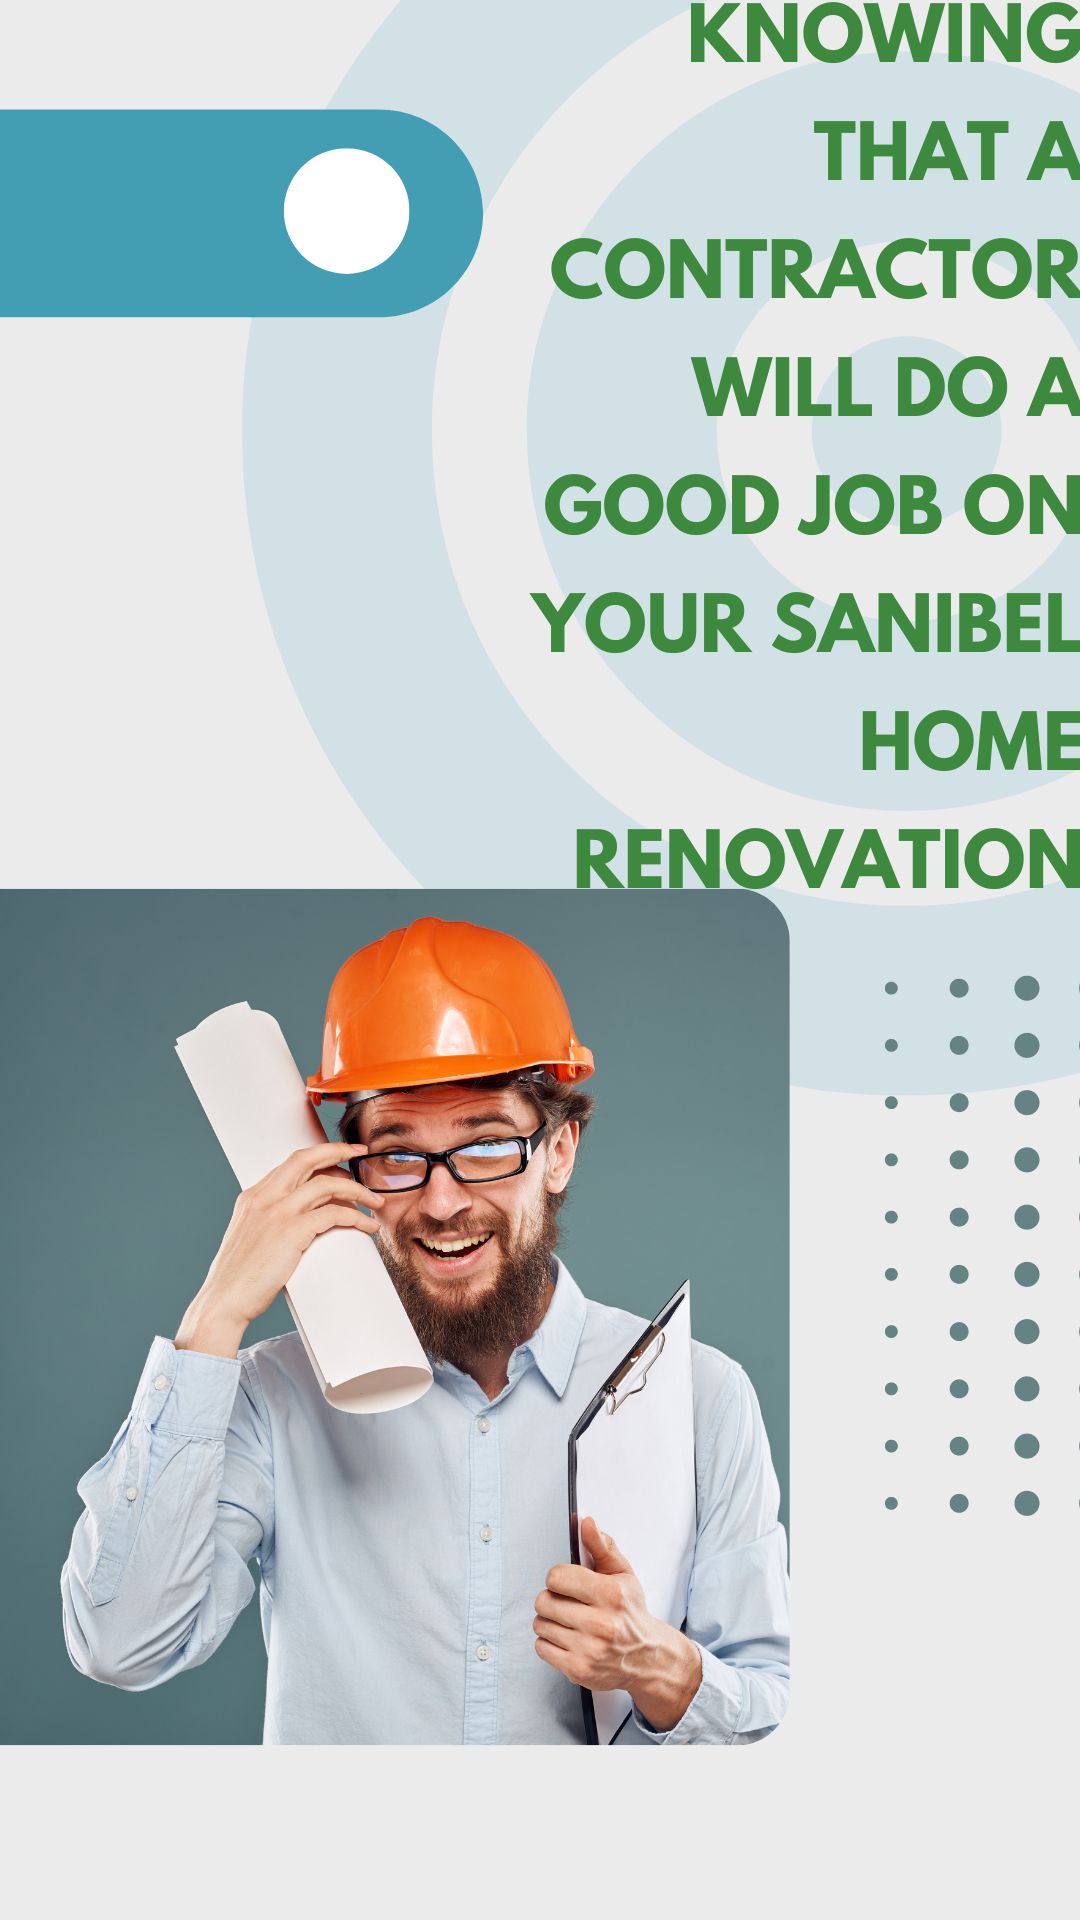 Knowing That a Contractor Will do a Good Job on Your Sanibel Home Renovation